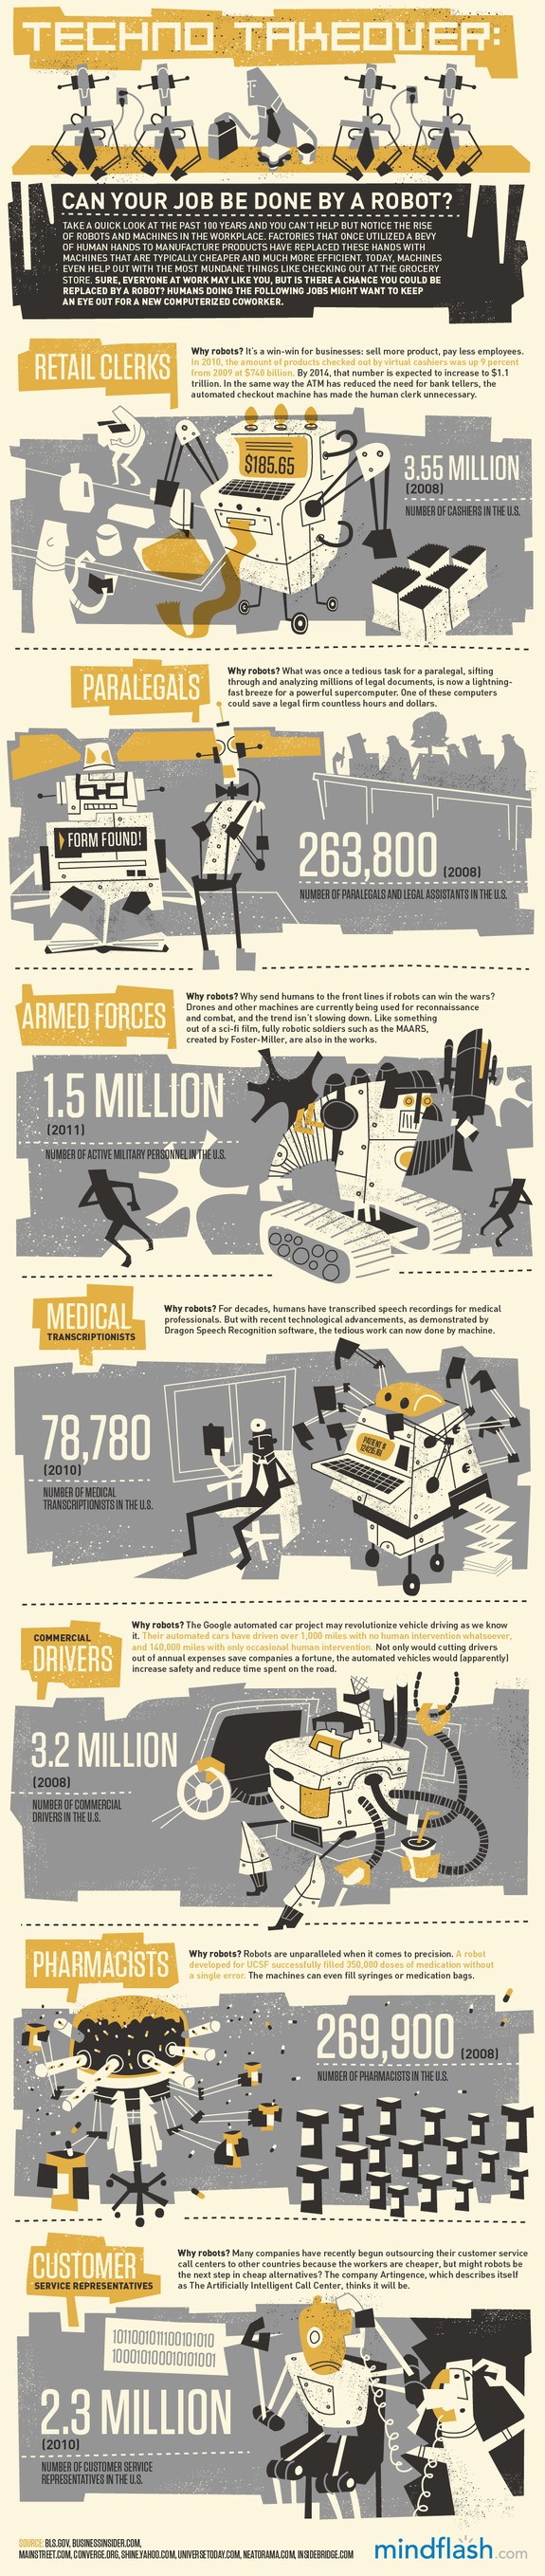 Can Your Job Be Done By a Robot? infographic